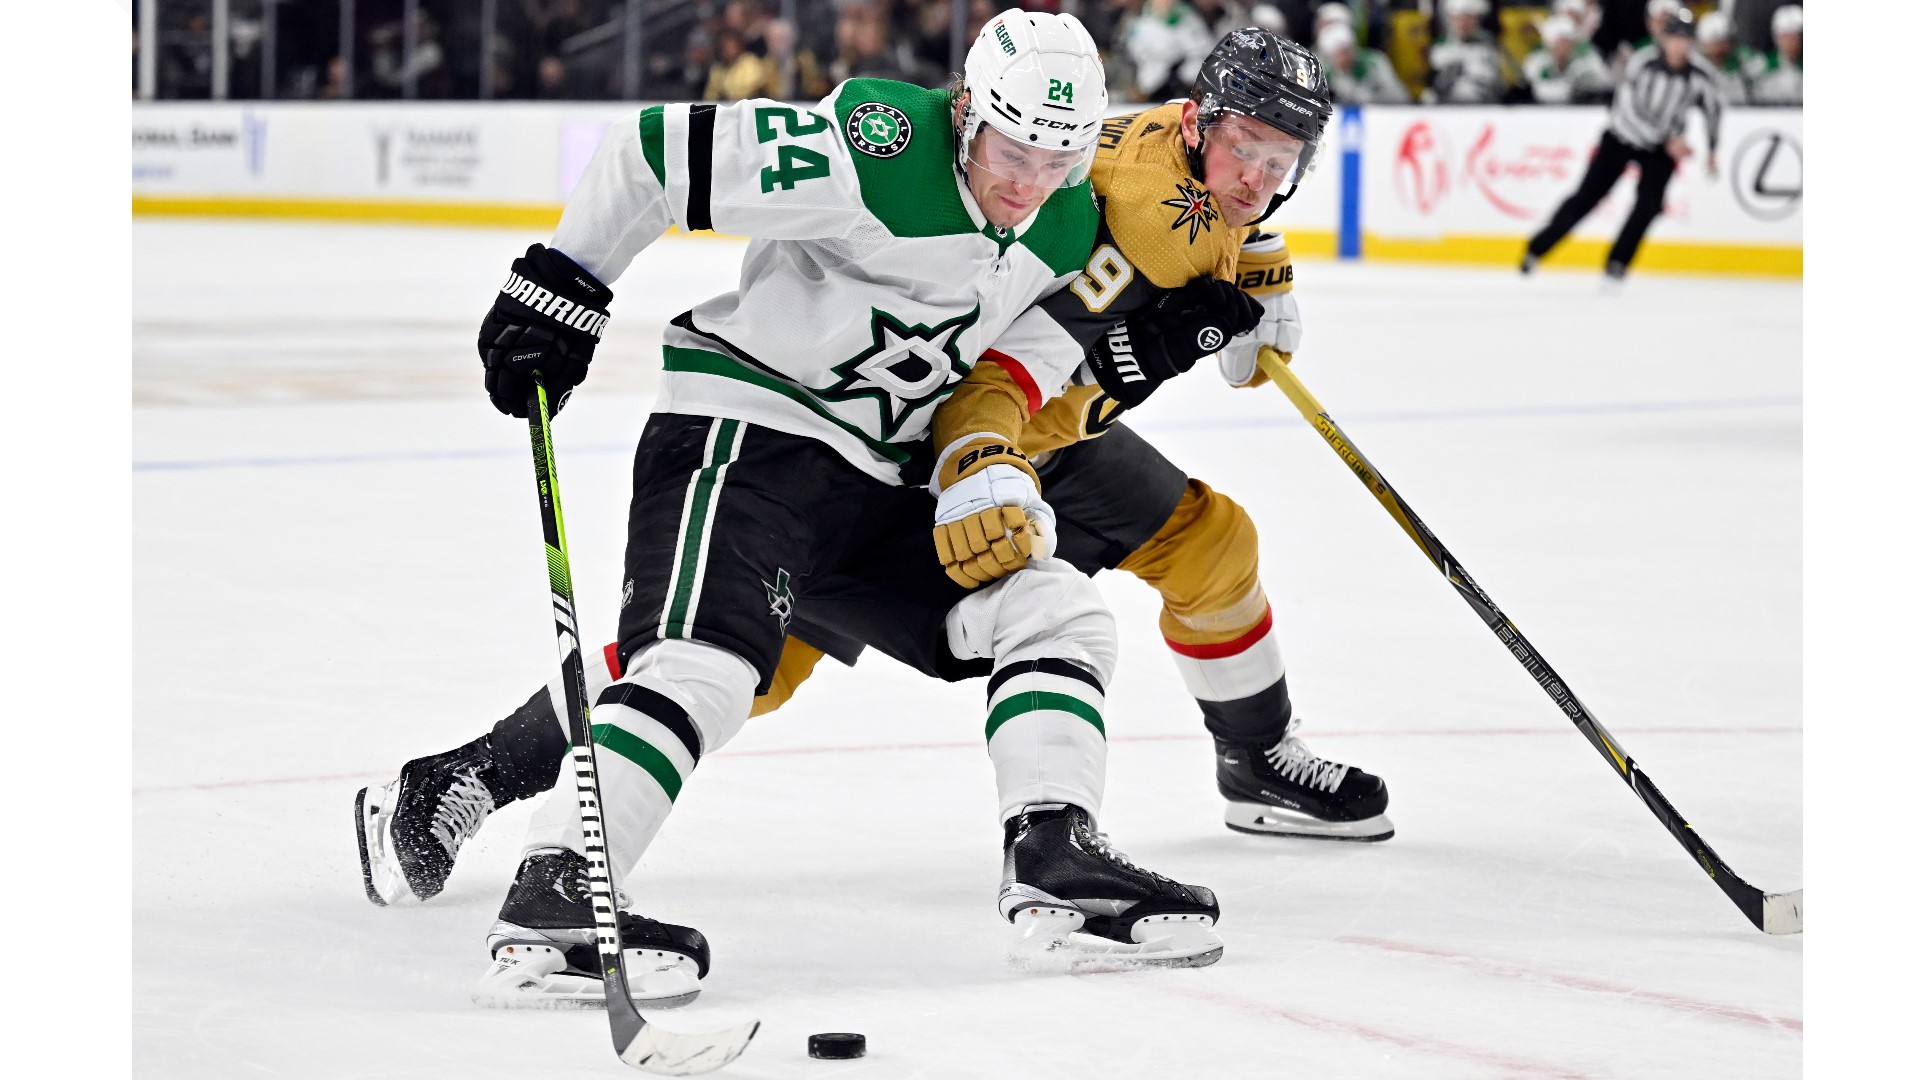 After their win against the Seattle Kraken, the Stars are headed to the Western Conference finals to take on the Vegas Golden Knights.